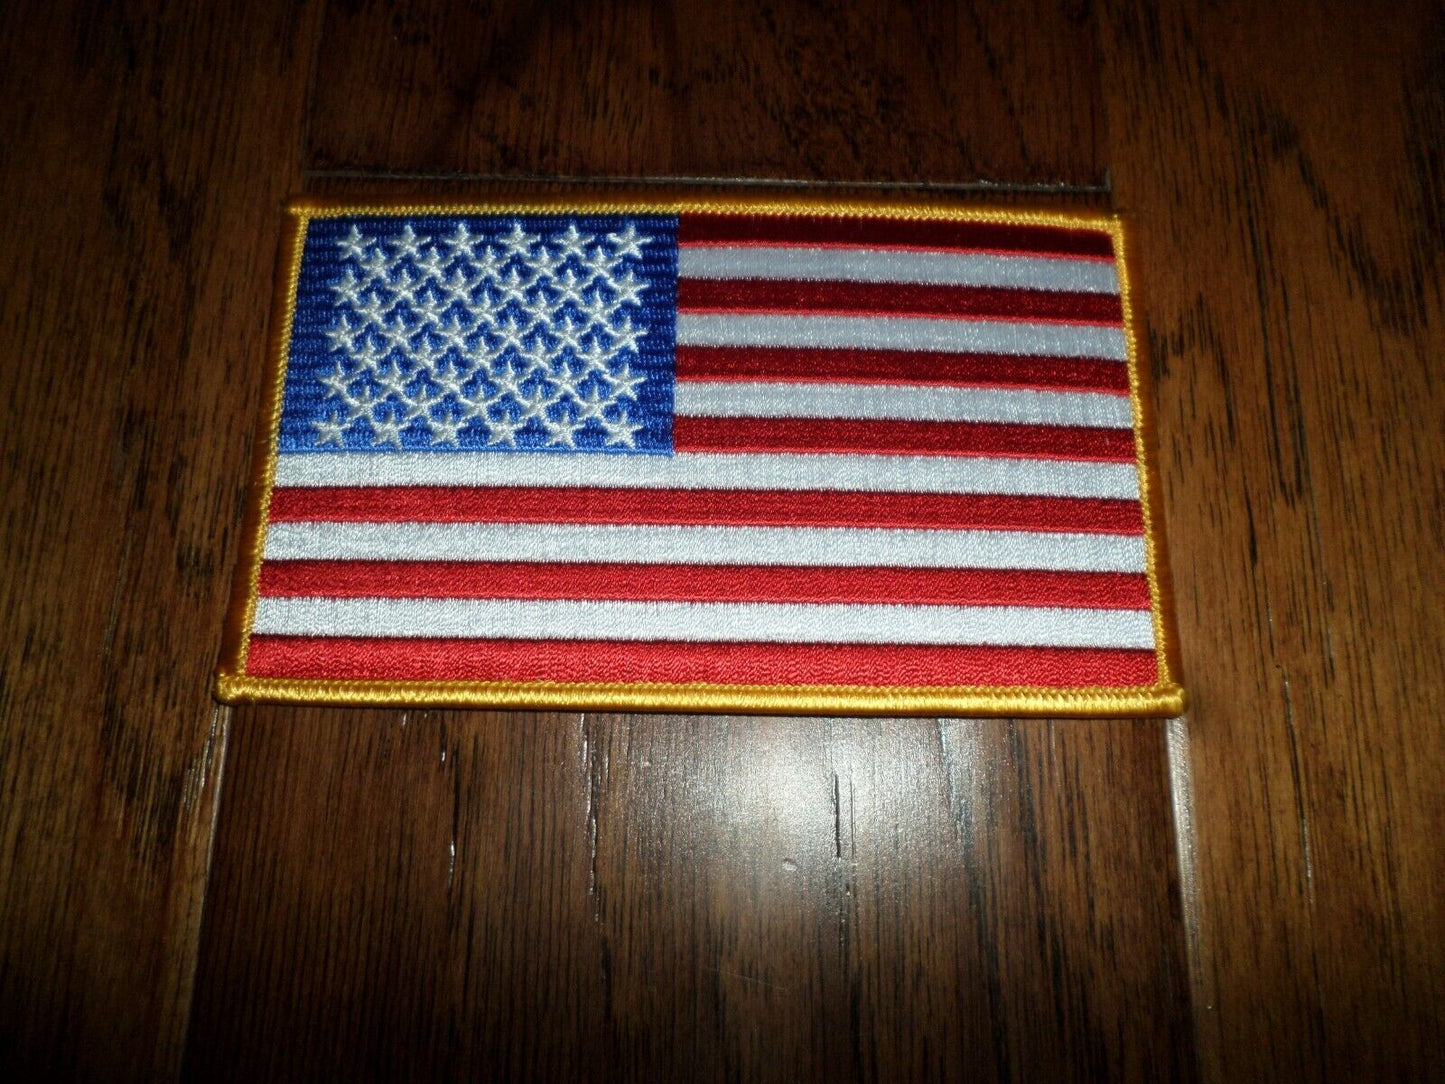 U.S AMERICAN FLAG ARM PATCH 3"X 5" FULL COLOR UNITED STATES EMBROIDERED FLAG